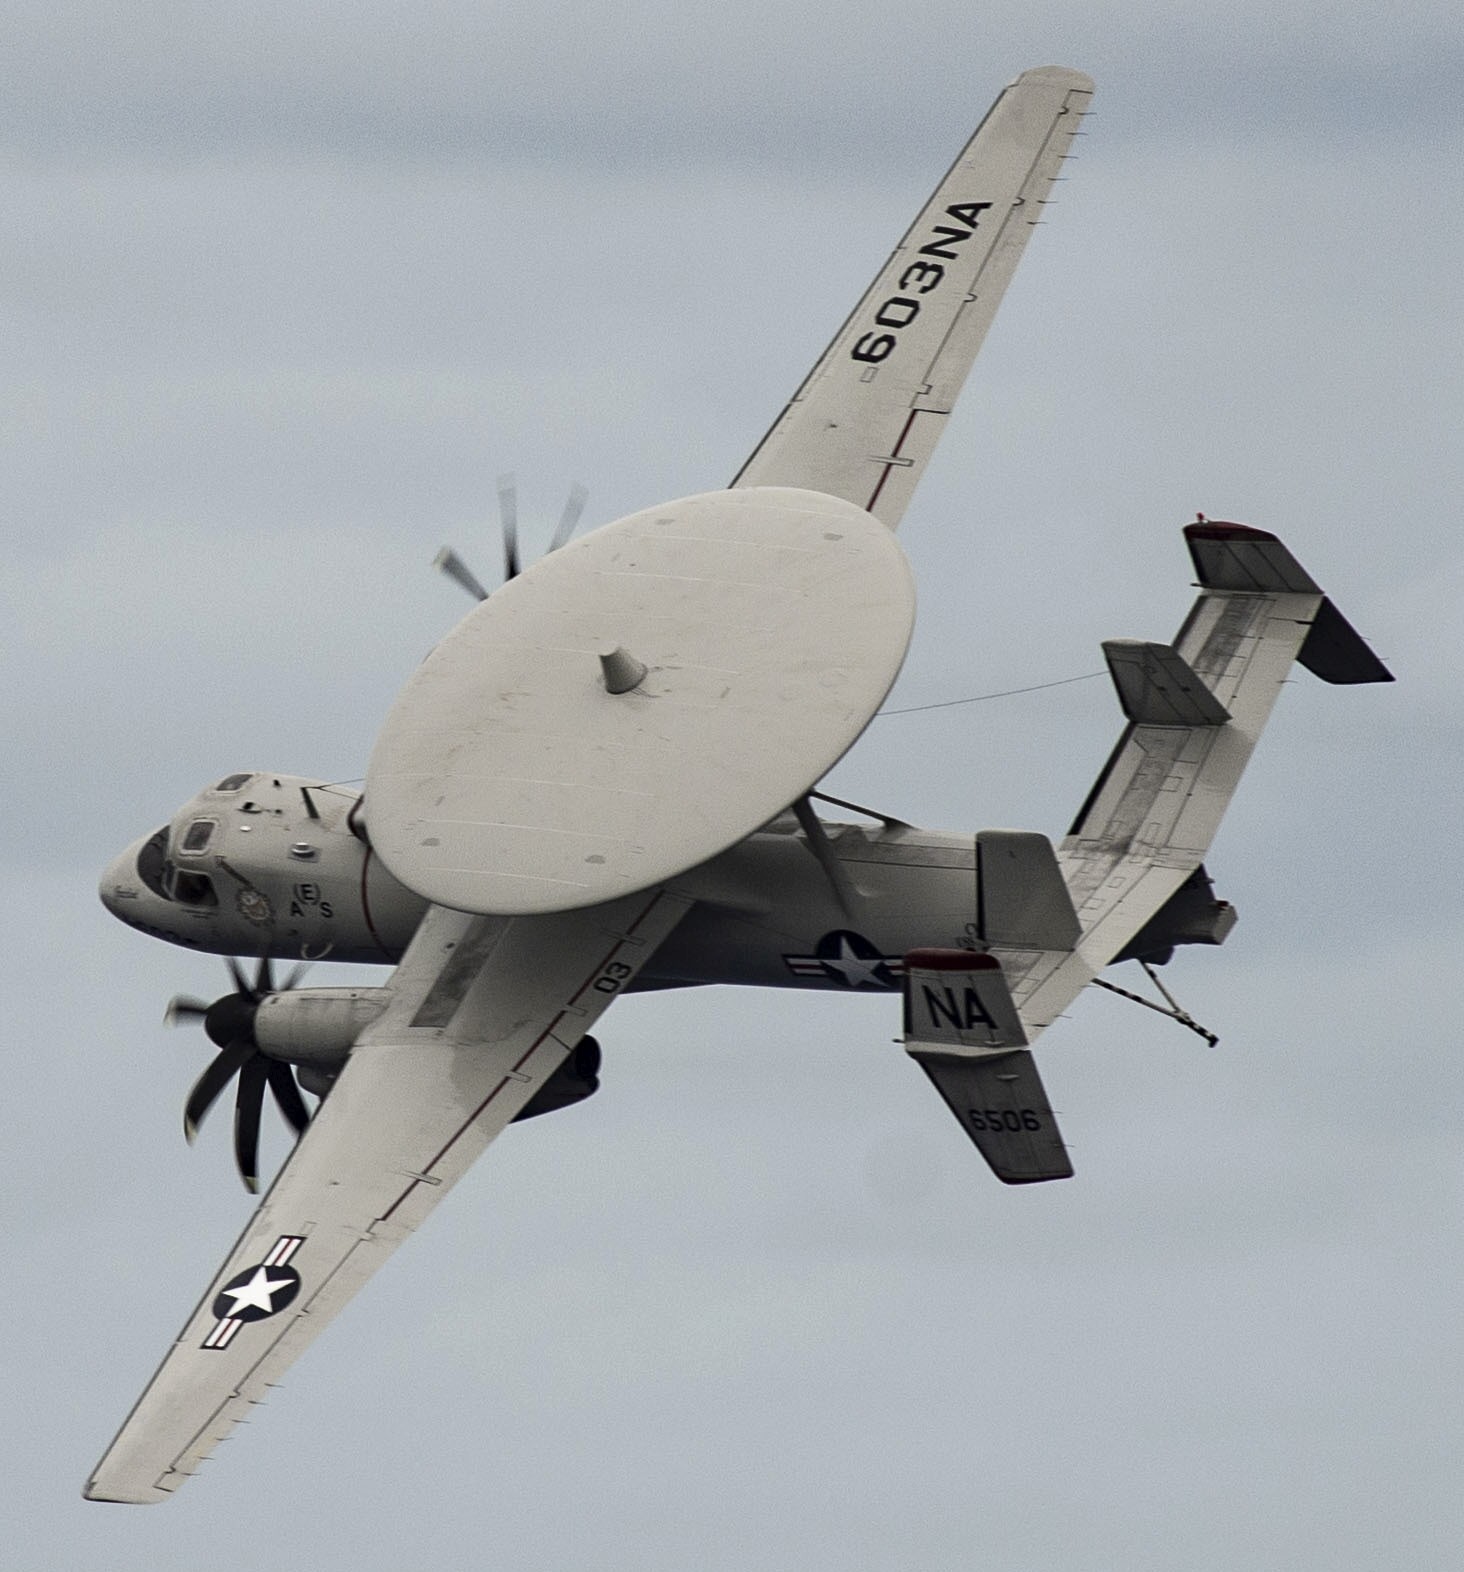 vaw-116 sun kings airborne command control squadron carrier early warning cvw-17 uss nimitz cvn-68 111